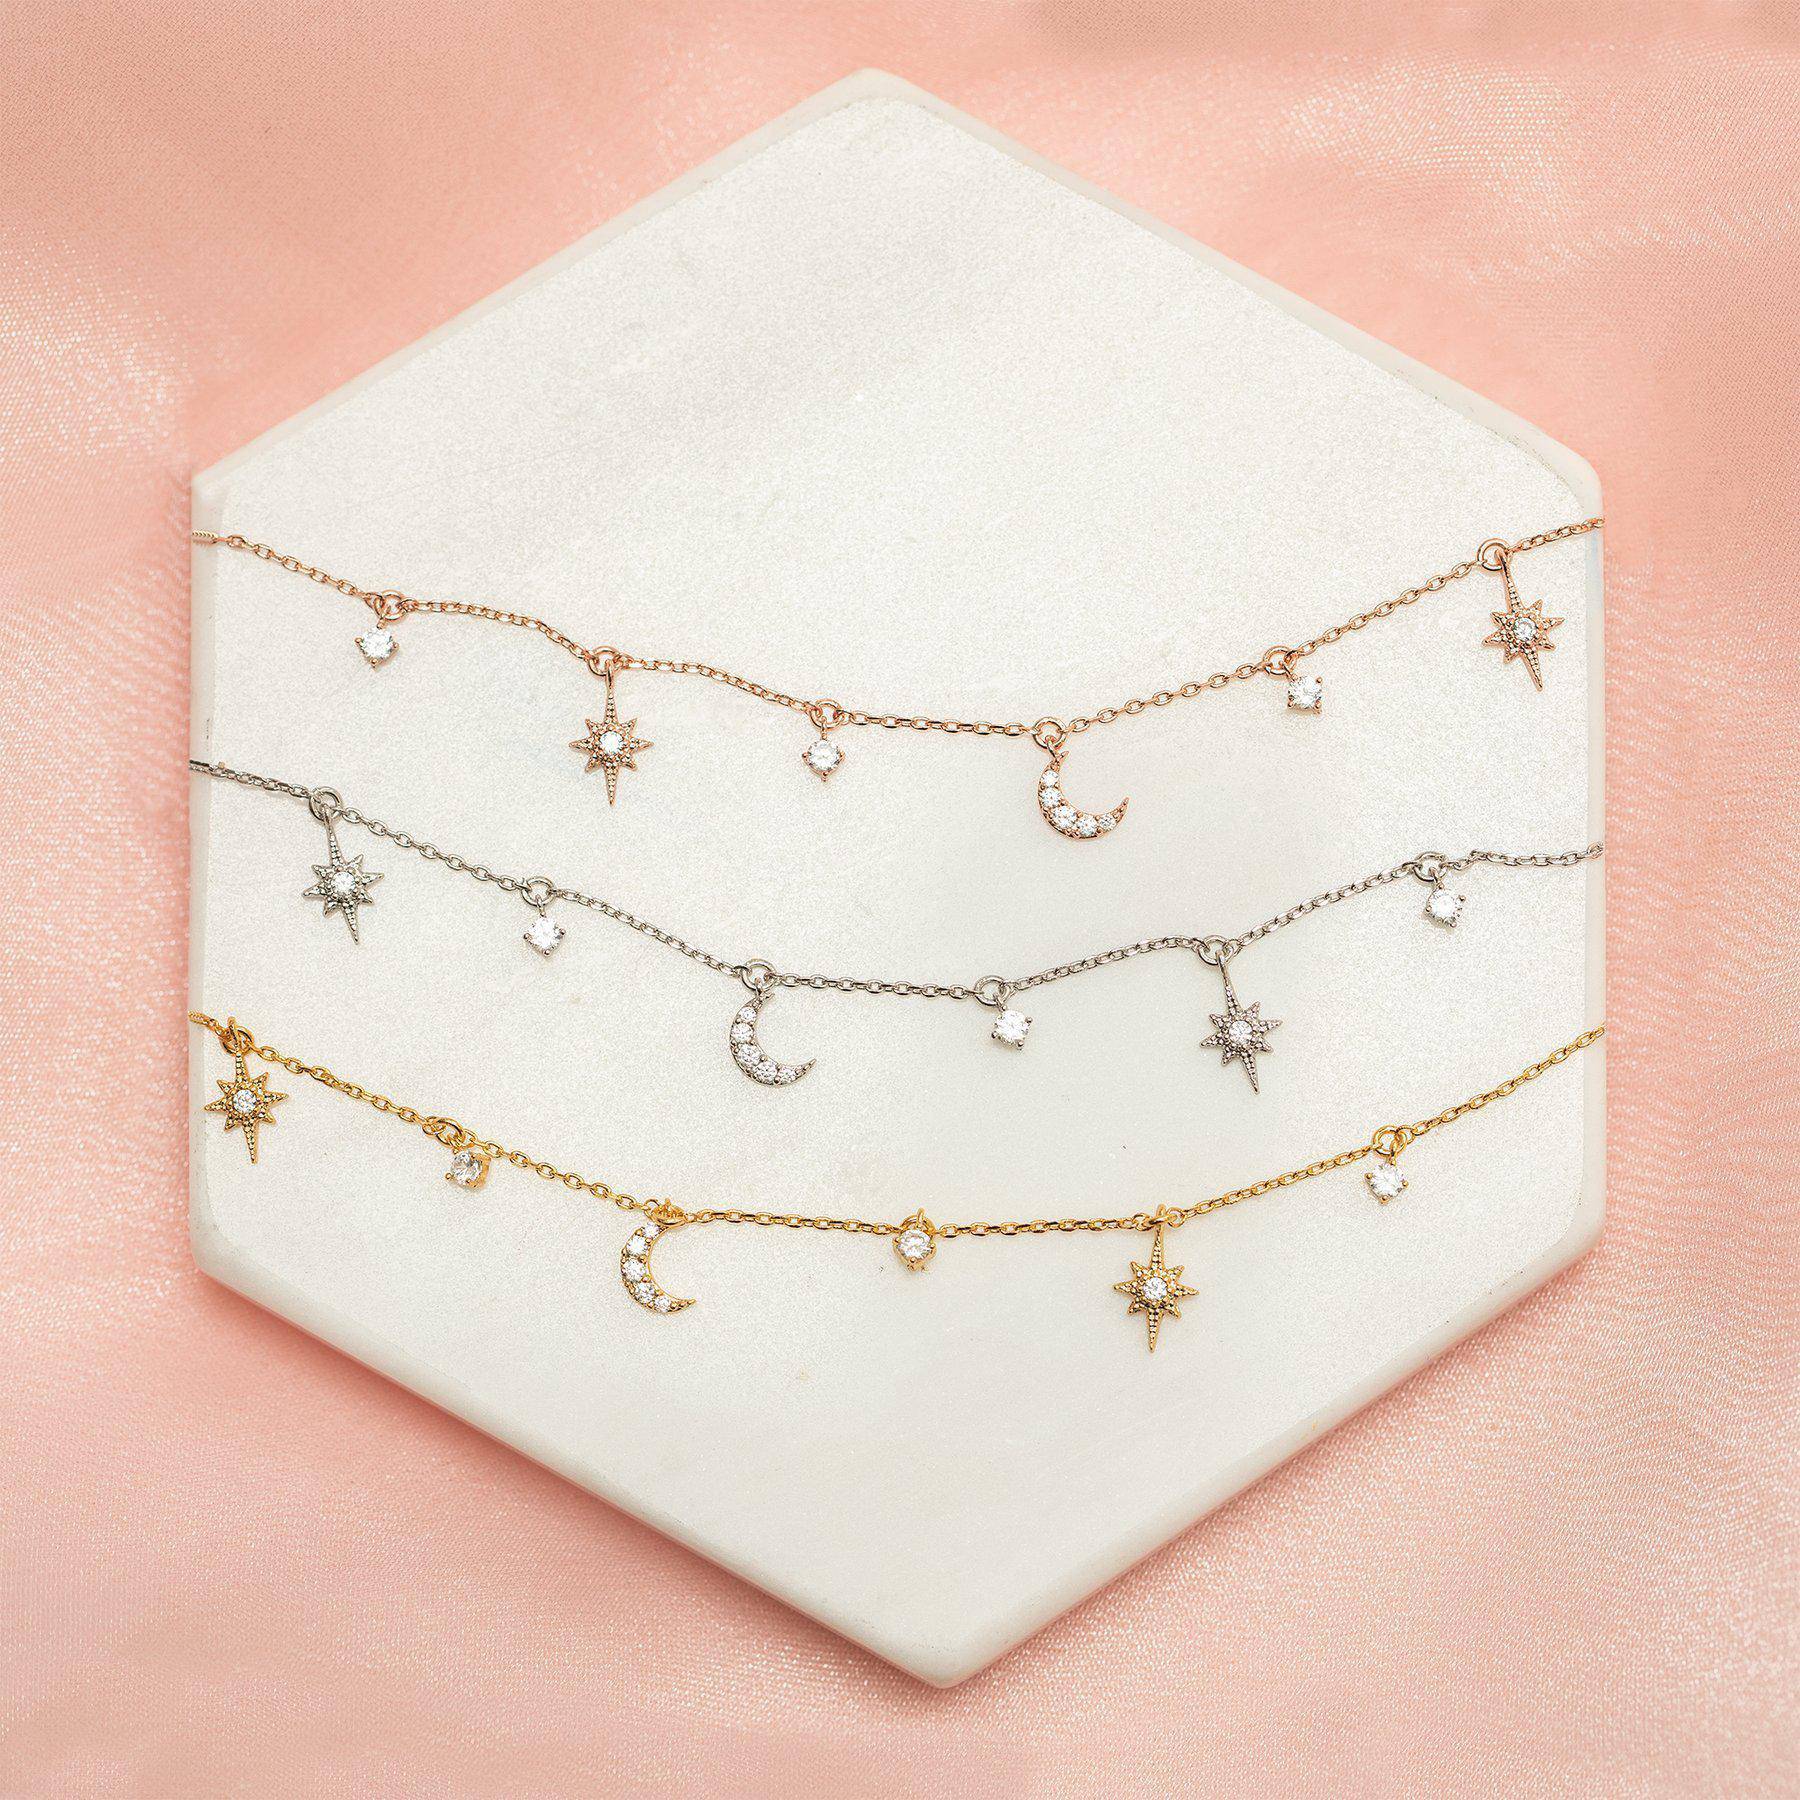 Supernova Charm Anklet - Gold - Twinkle Twinkle Little One